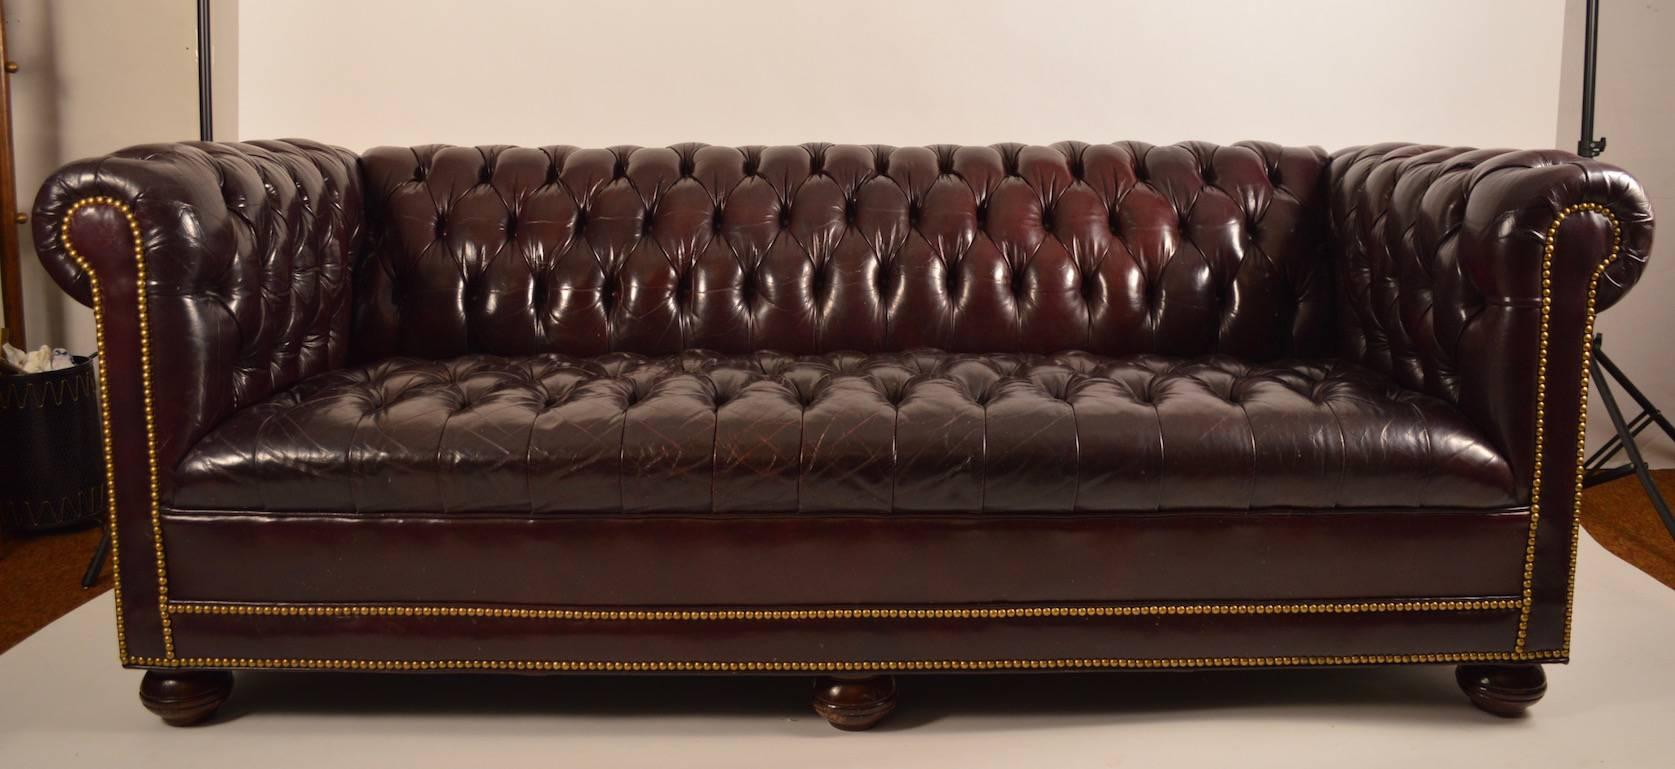 Classic tuxedo form, burgundy leather box sofa. Fully tufted, with decorative button studs. Very good original condition, ready to use. Measures: Seat depth 21